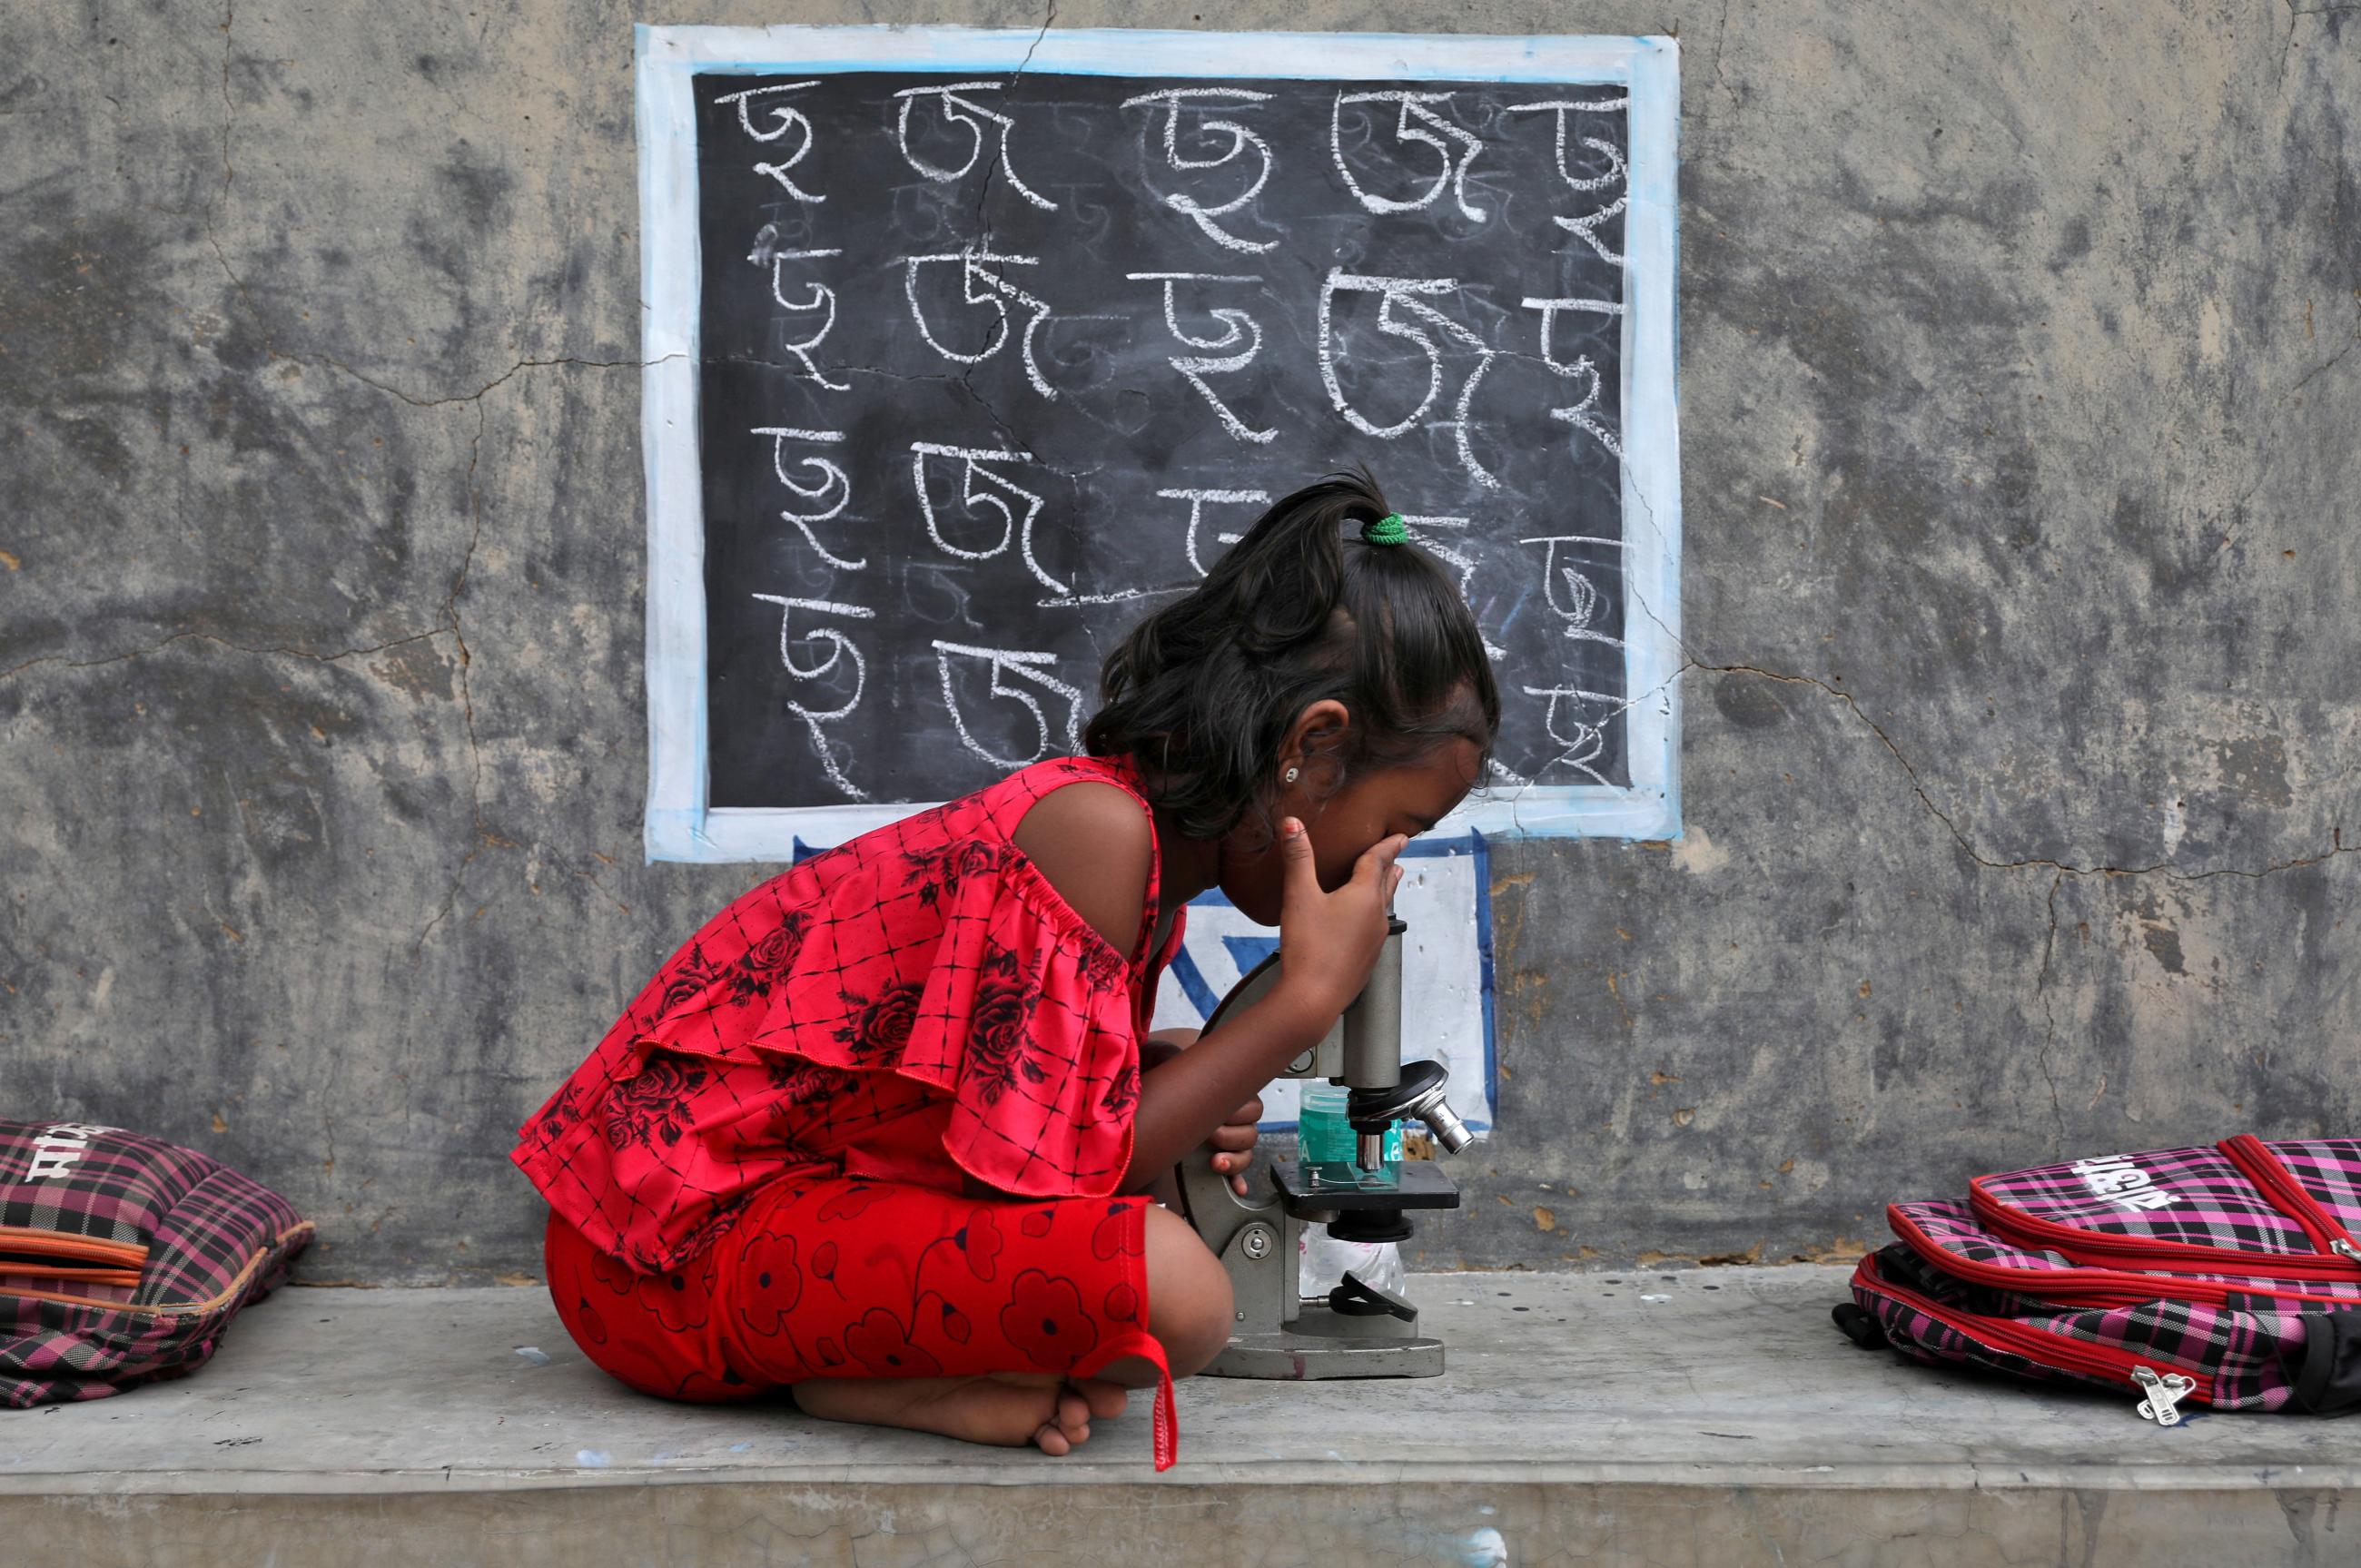 A young student uses a microscope as she attends a class outside of a home whose walls are converted into blackboards, in Joba Attpara village in West Bengal, India, on September 13, 2021.